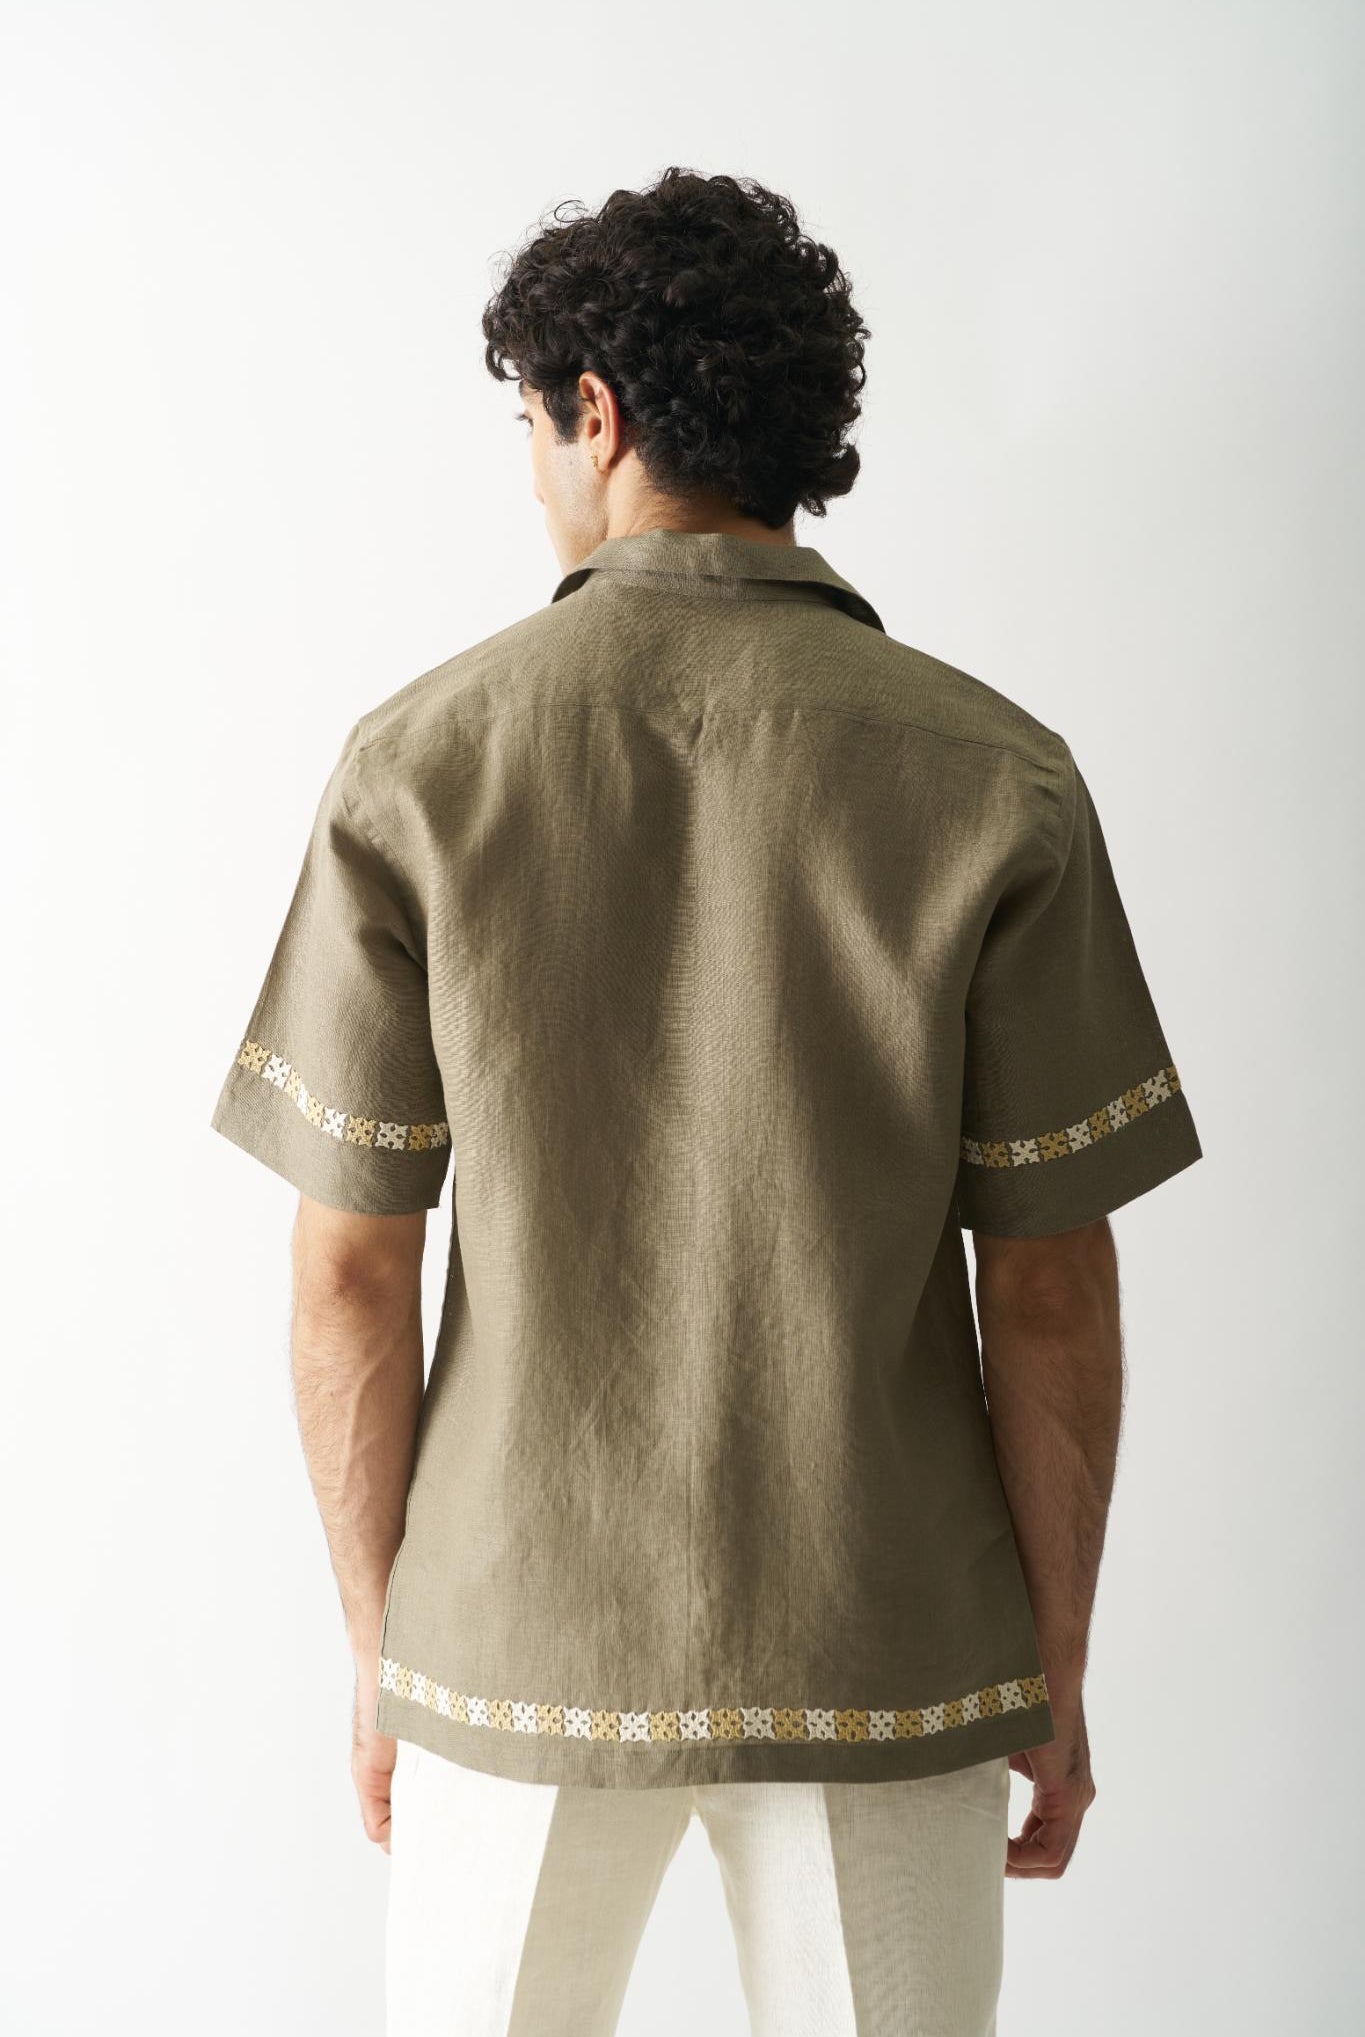 Call Me Aesthetic - Mens Hand Embroidered Pure Linen Shirt - CiceroniShirtsCultura Studio